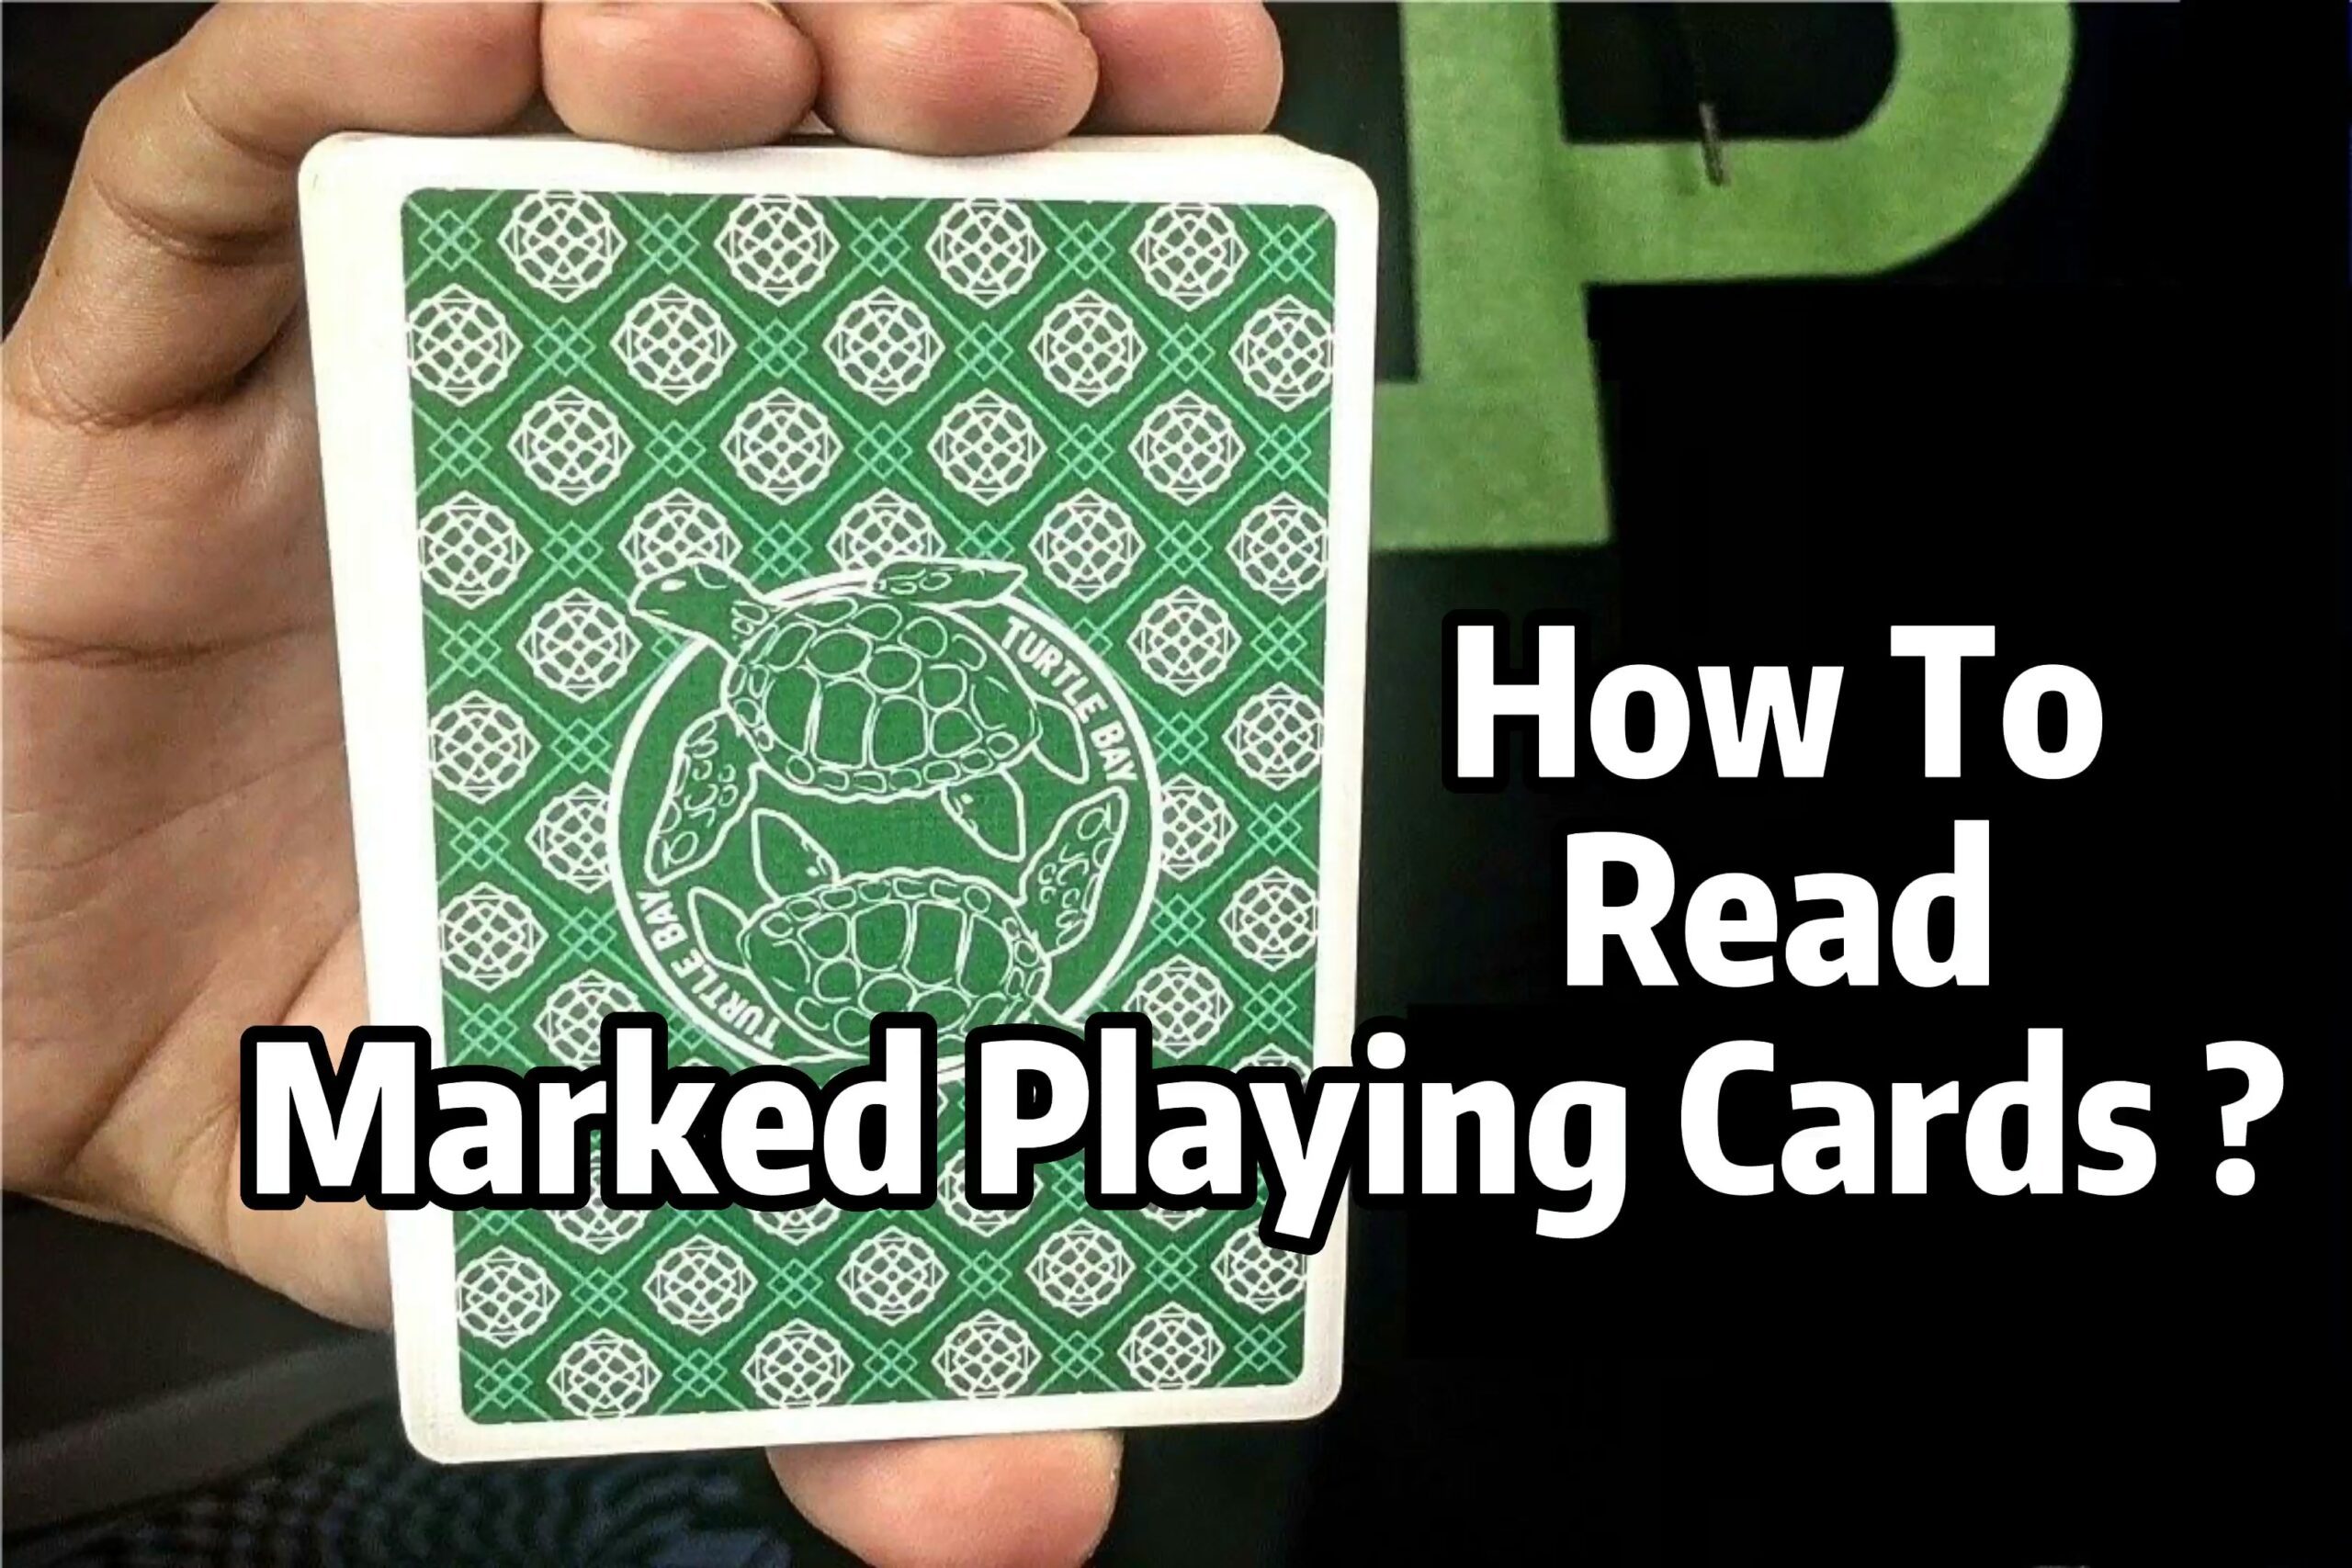 How To Read Marked Playing Cards